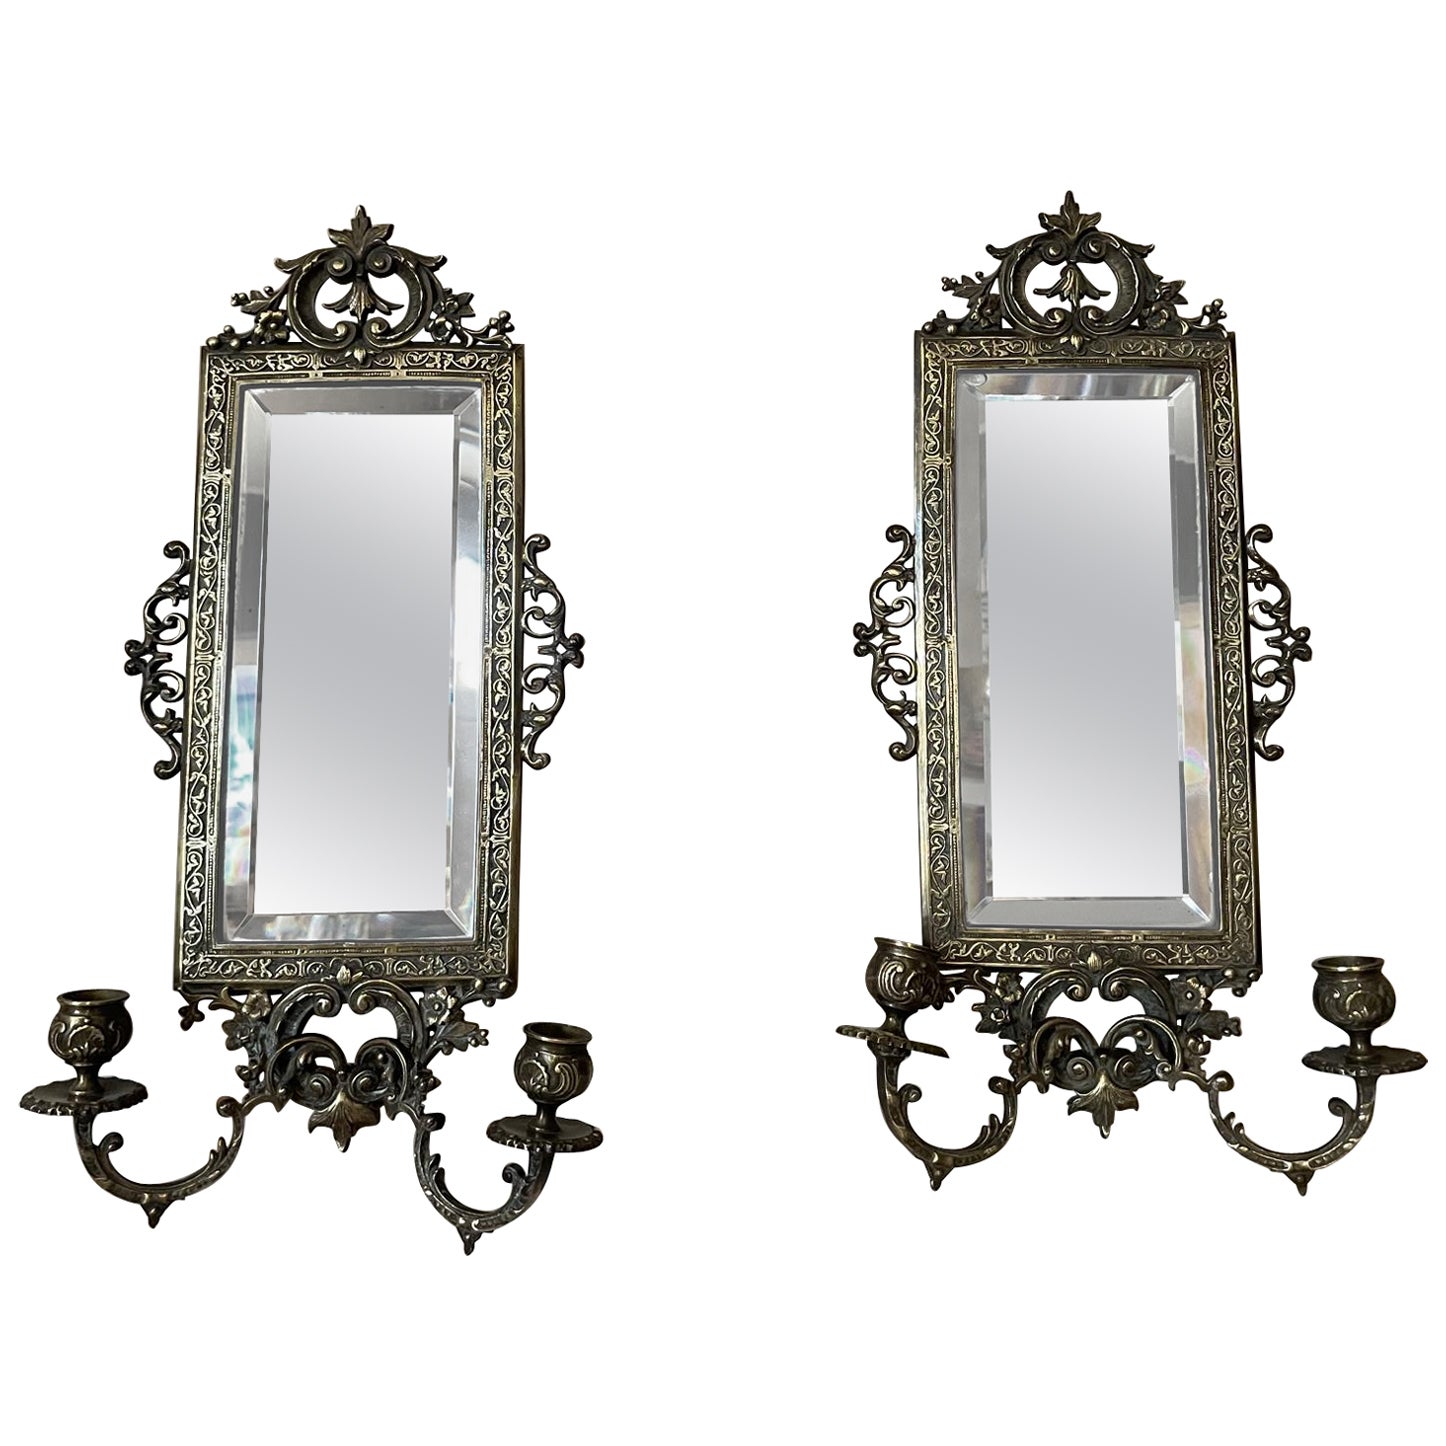 19th century Louis XV style Bronze Candle Holder Mirror